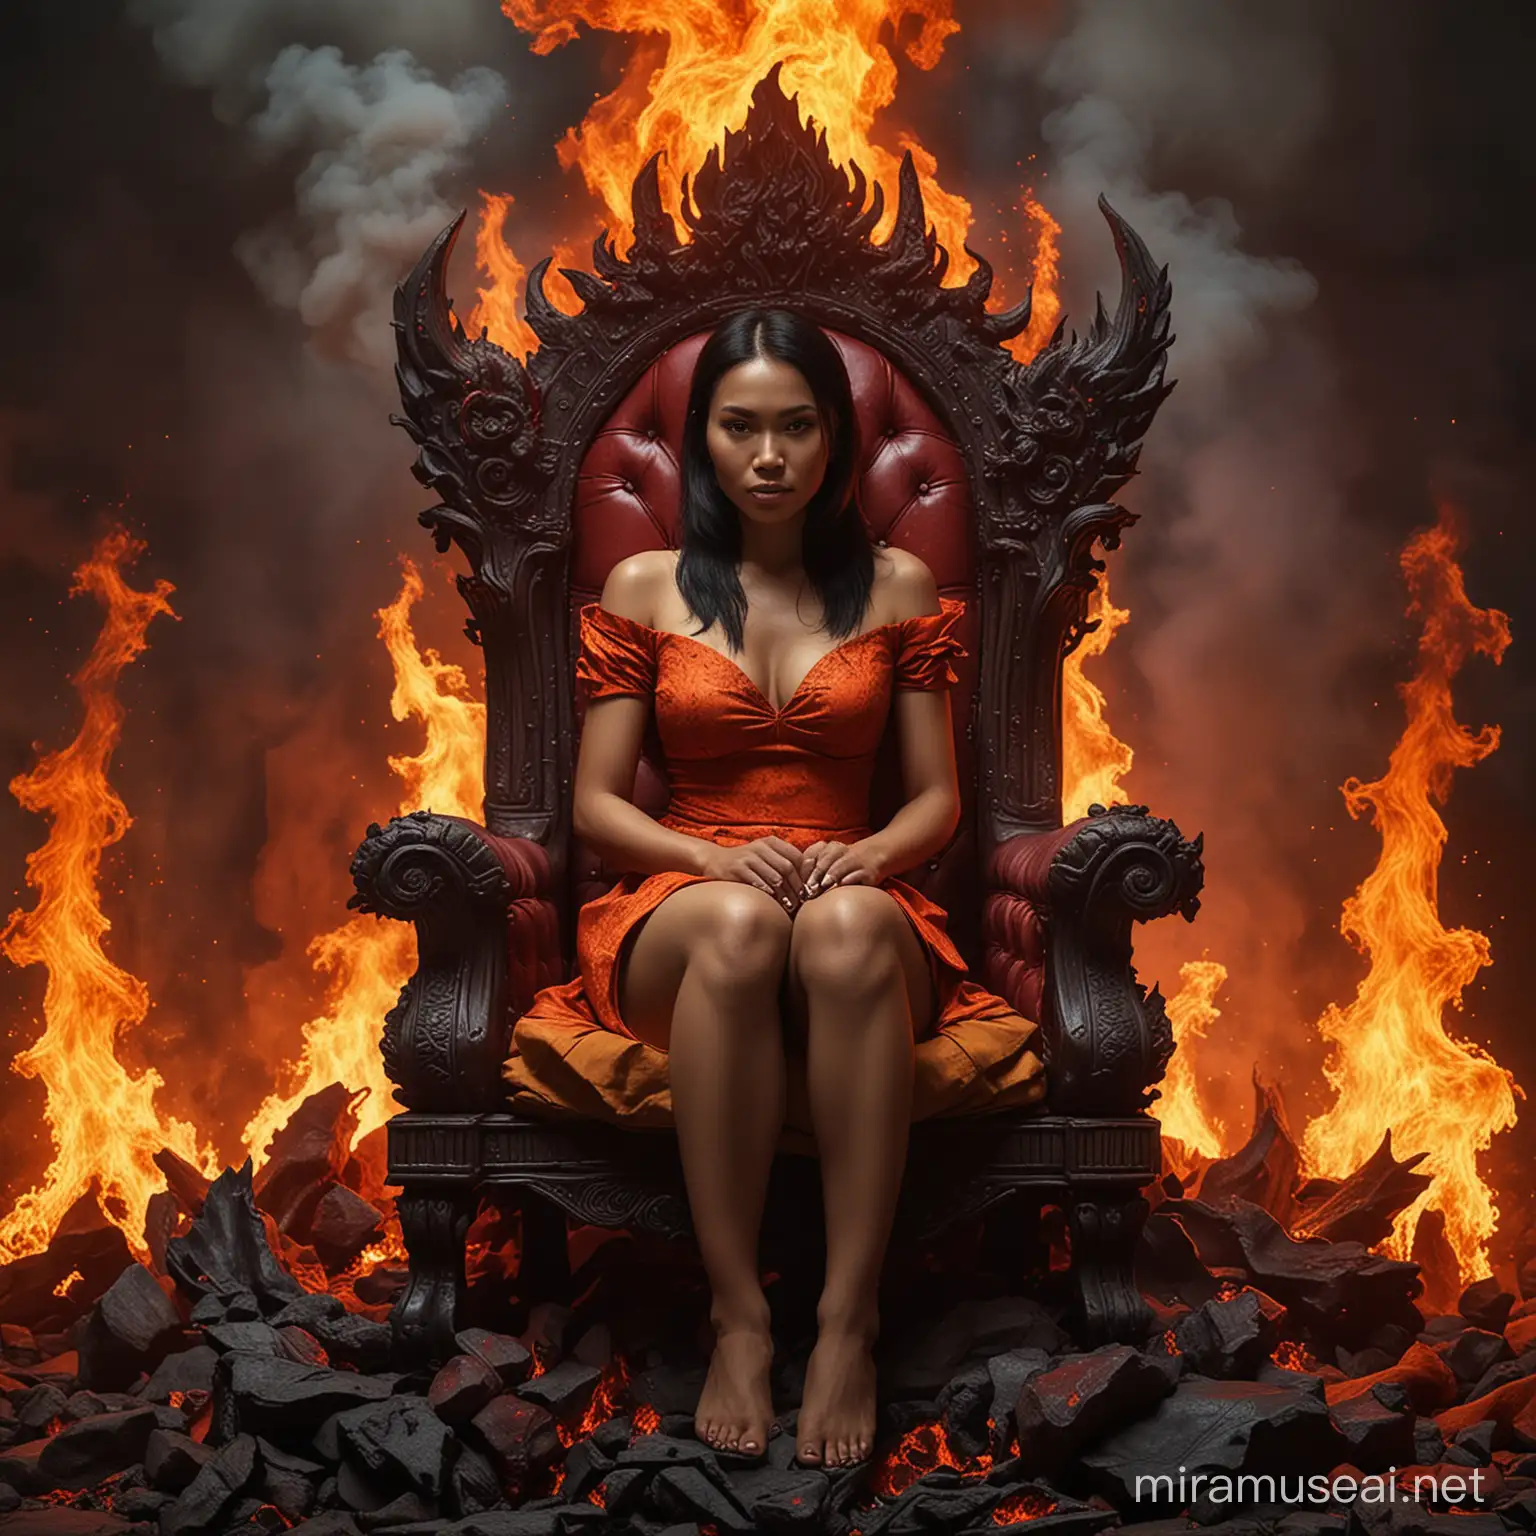 Indonesian Woman Sits on Devils Chair in Realistic Version 4 Hell